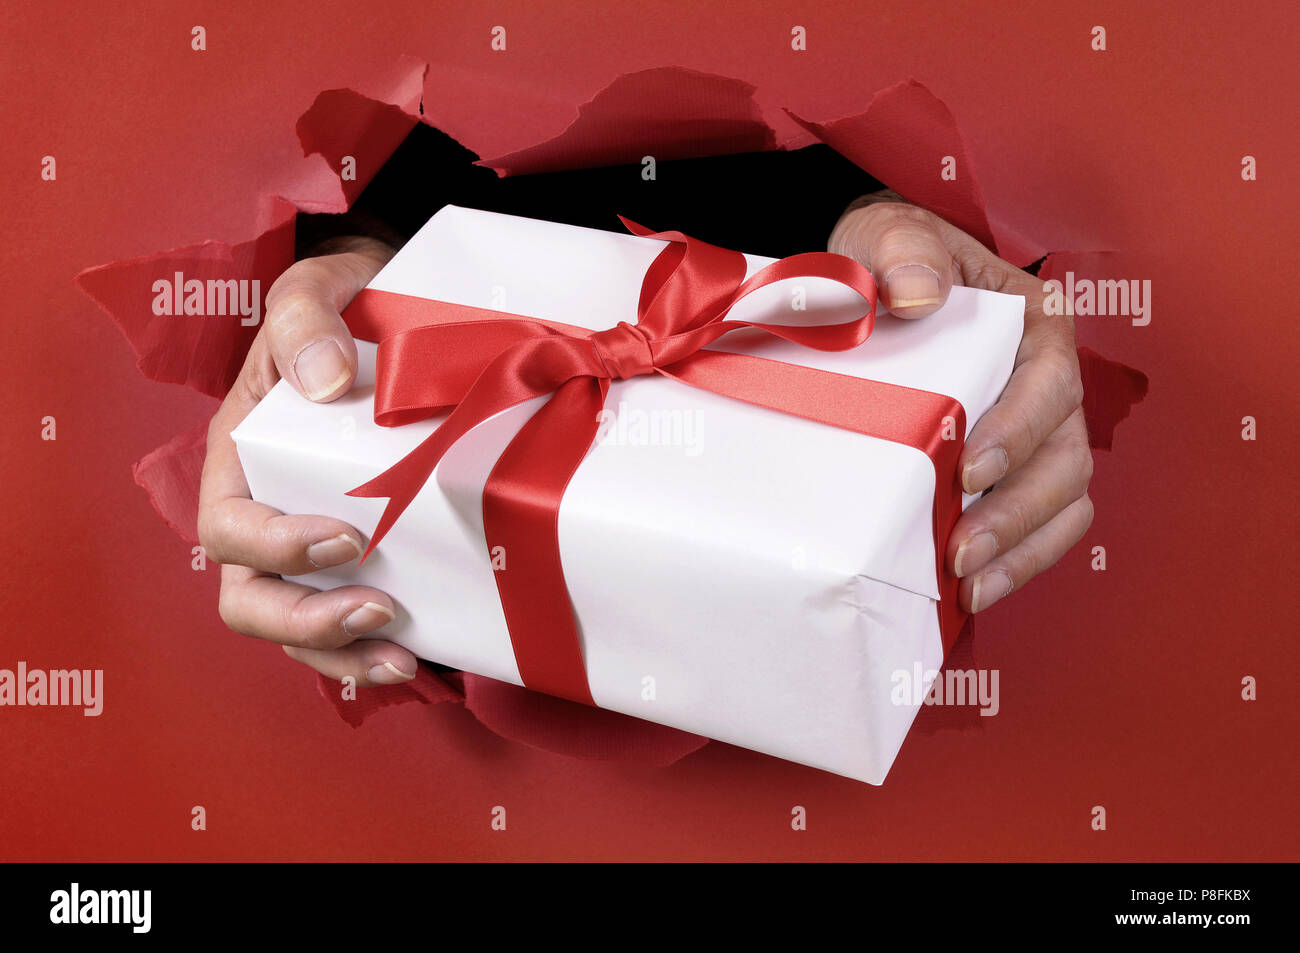 White gift with ribbon being delivered through a red torn paper background. Stock Photo